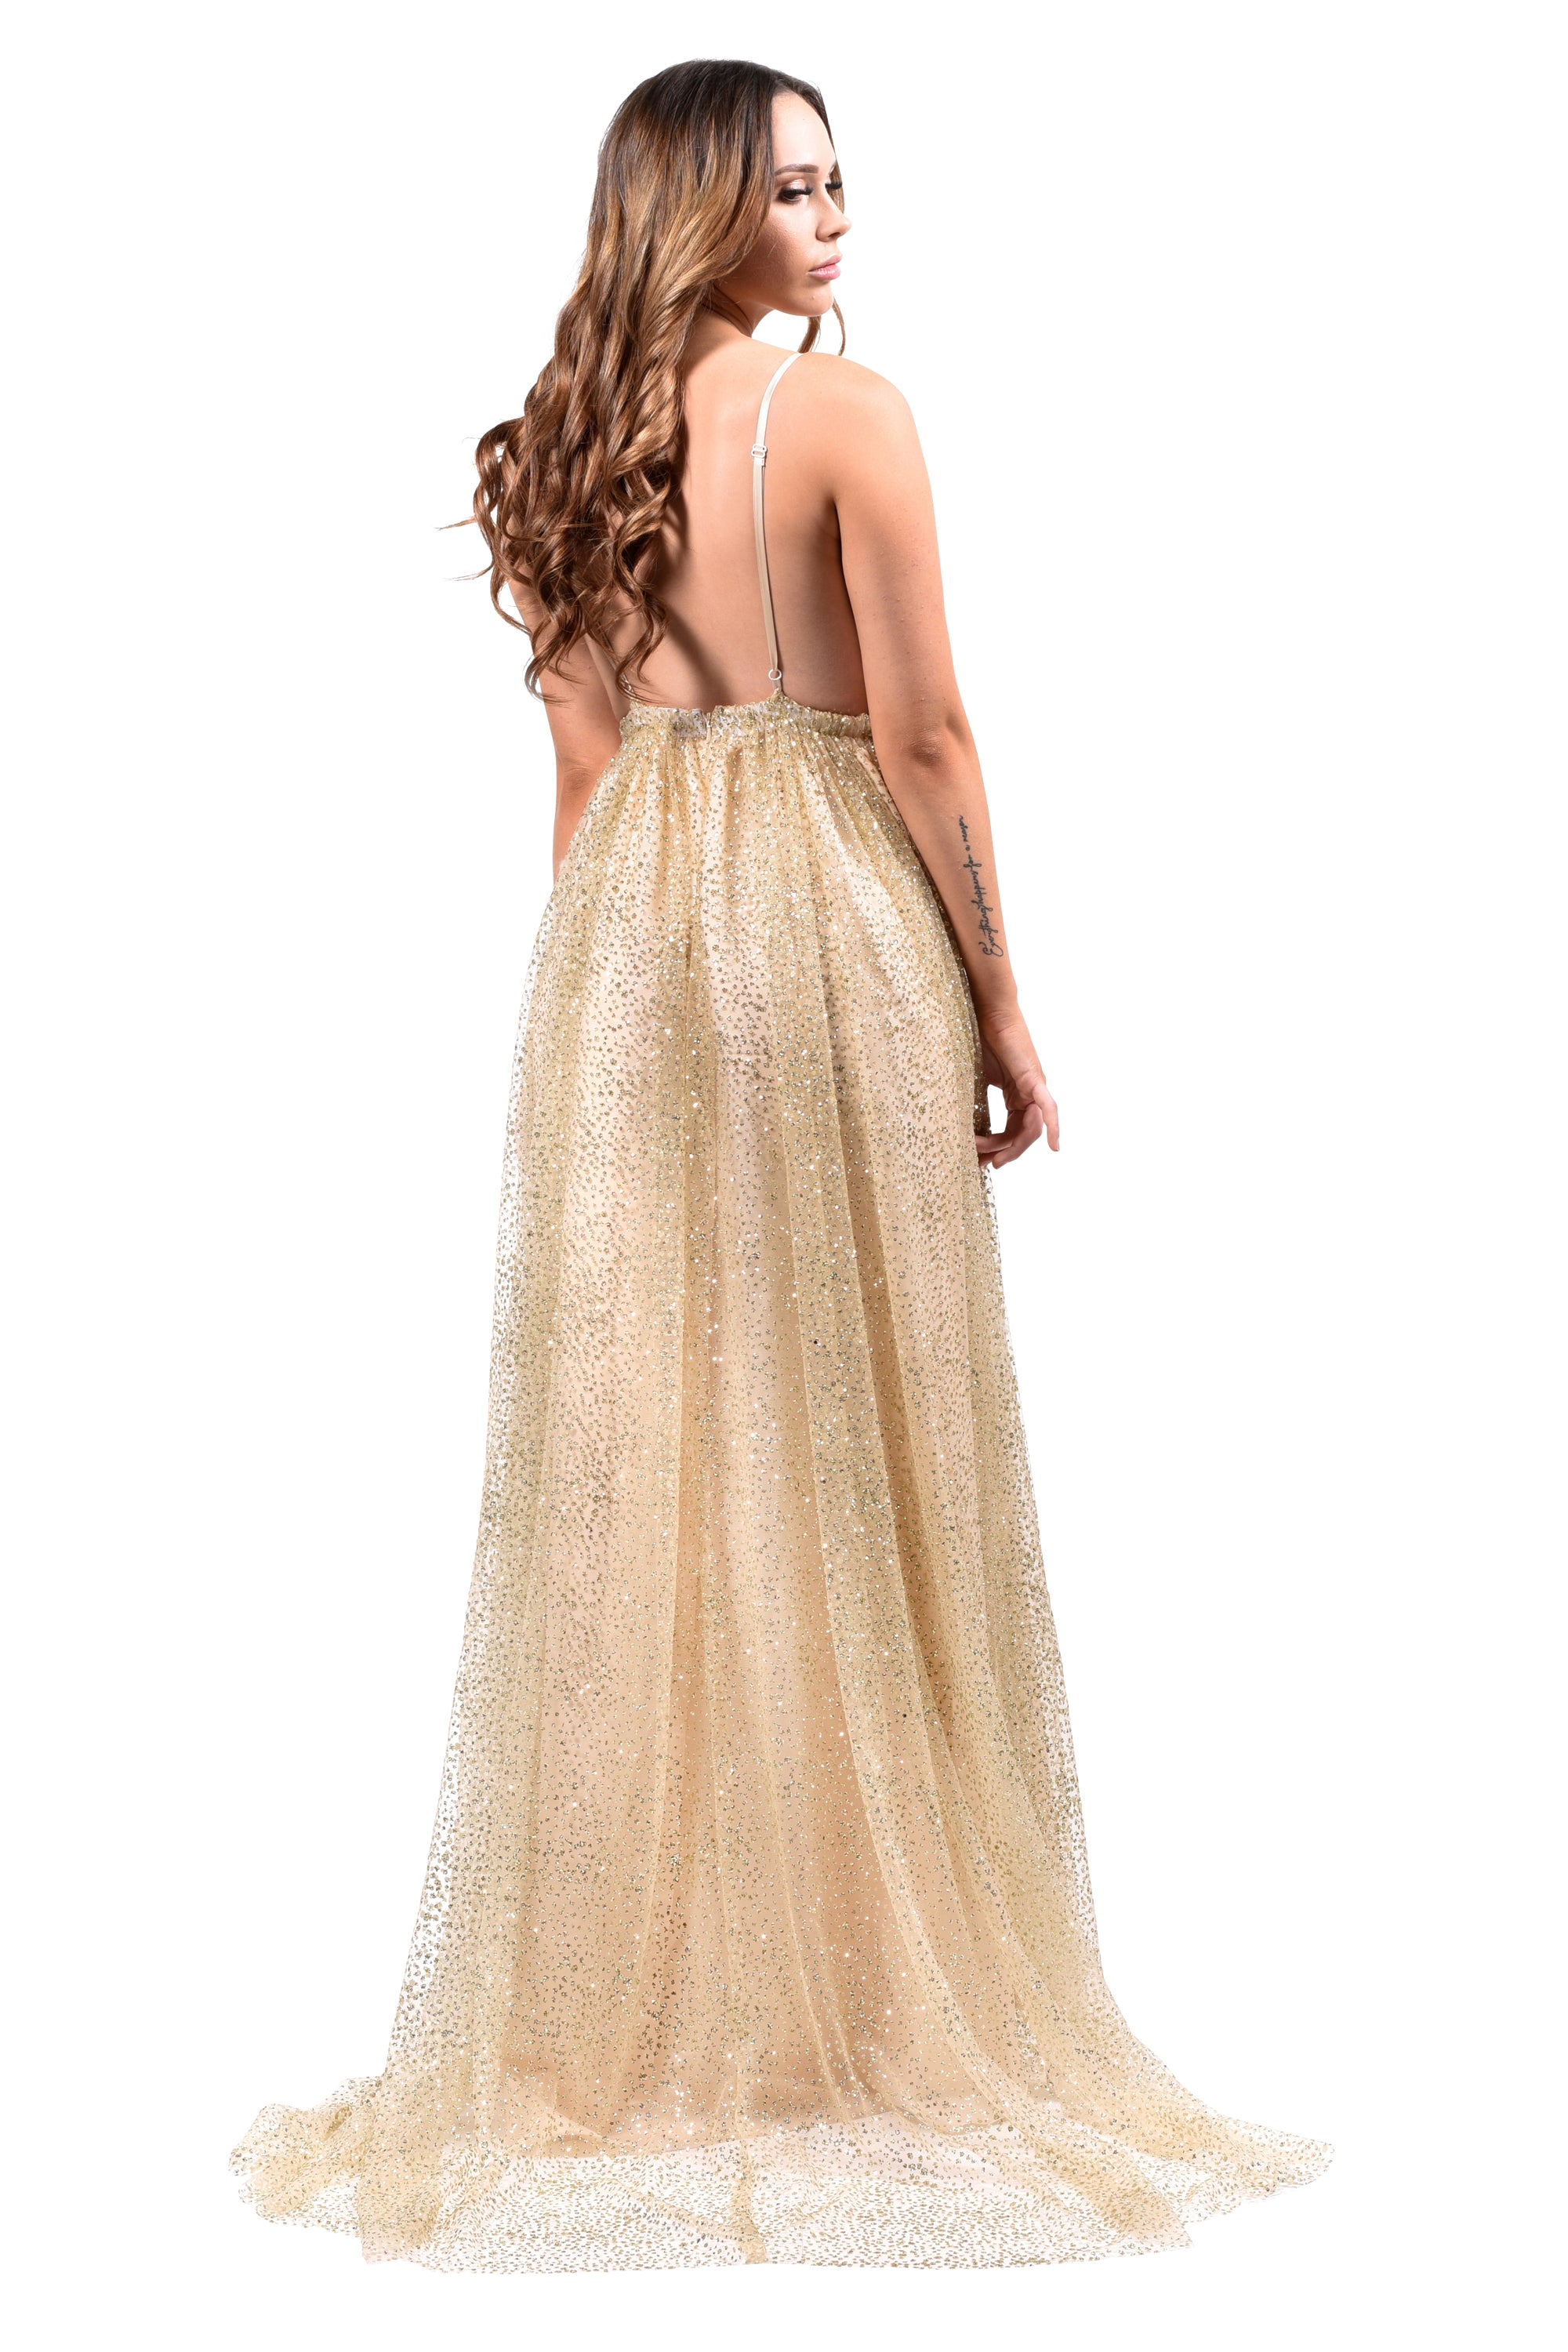 Honey Couture GEORGIA Gold Glitter Formal Gown Private Label$ AfterPay Humm ZipPay LayBuy Sezzle